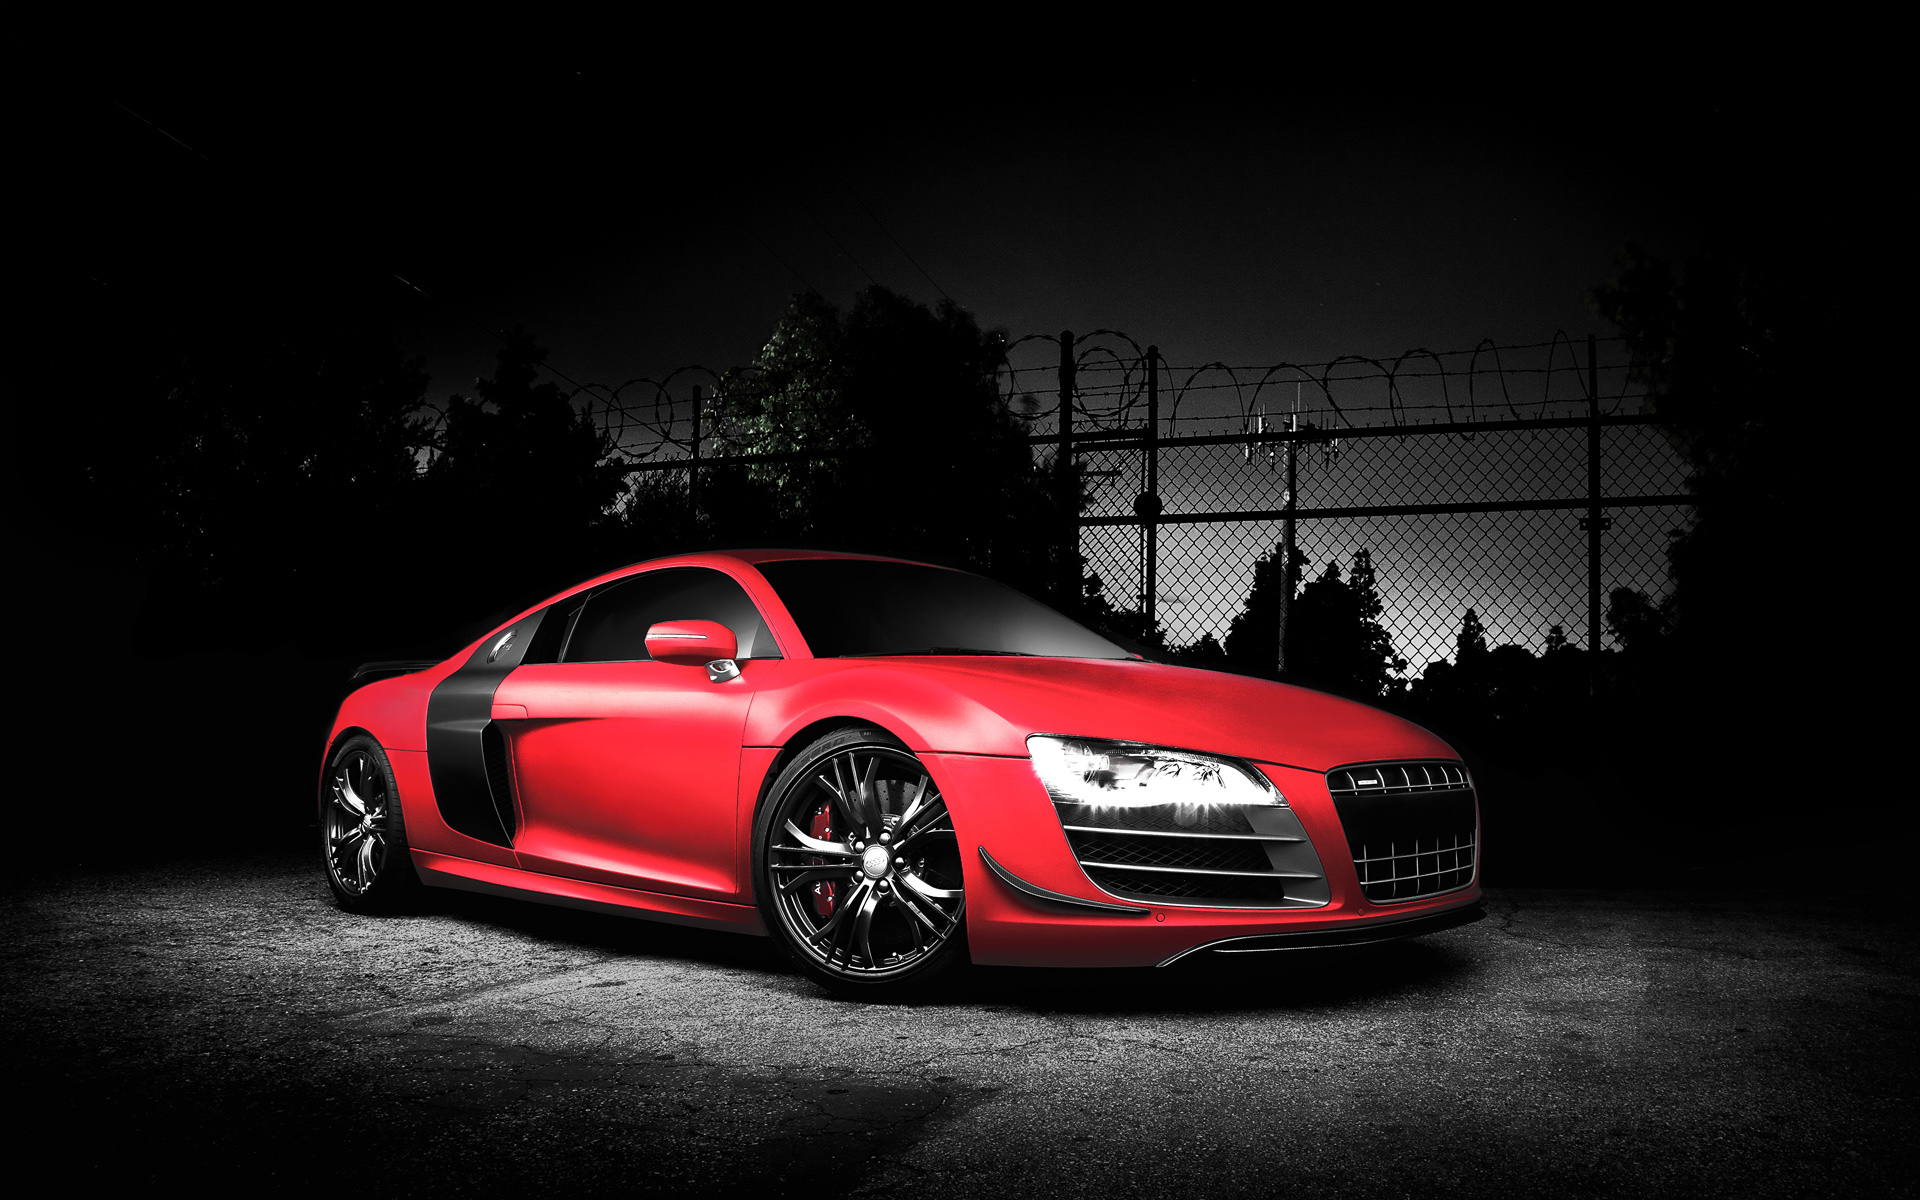 Cool HD Audi Wallpapers For Free Download